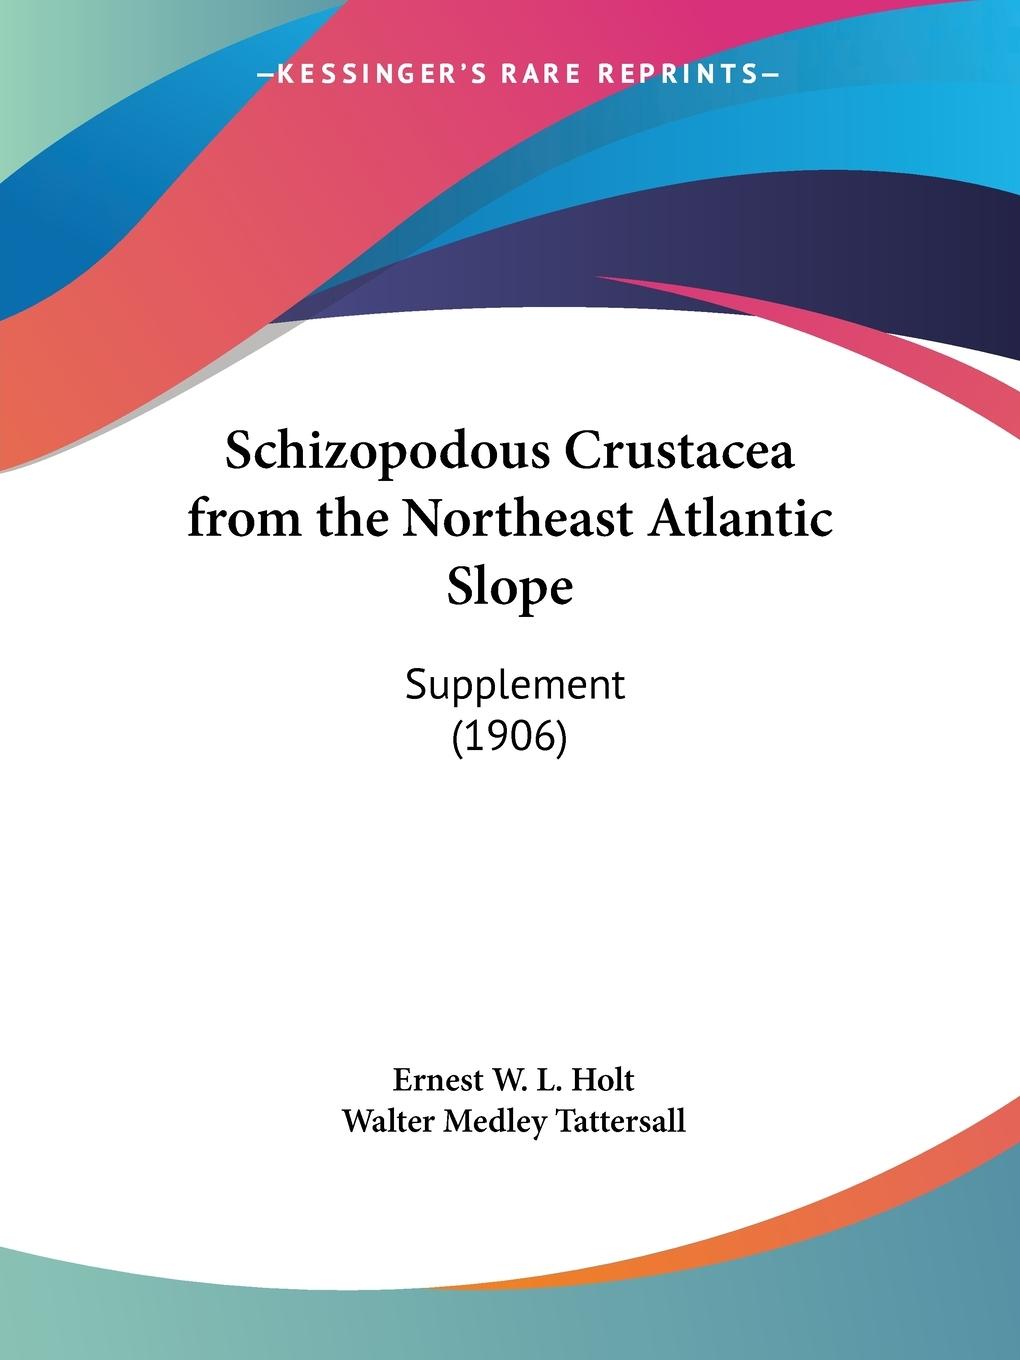 Schizopodous Crustacea from the Northeast Atlantic Slope - Holt, Ernest W. L. Tattersall, Walter Medley